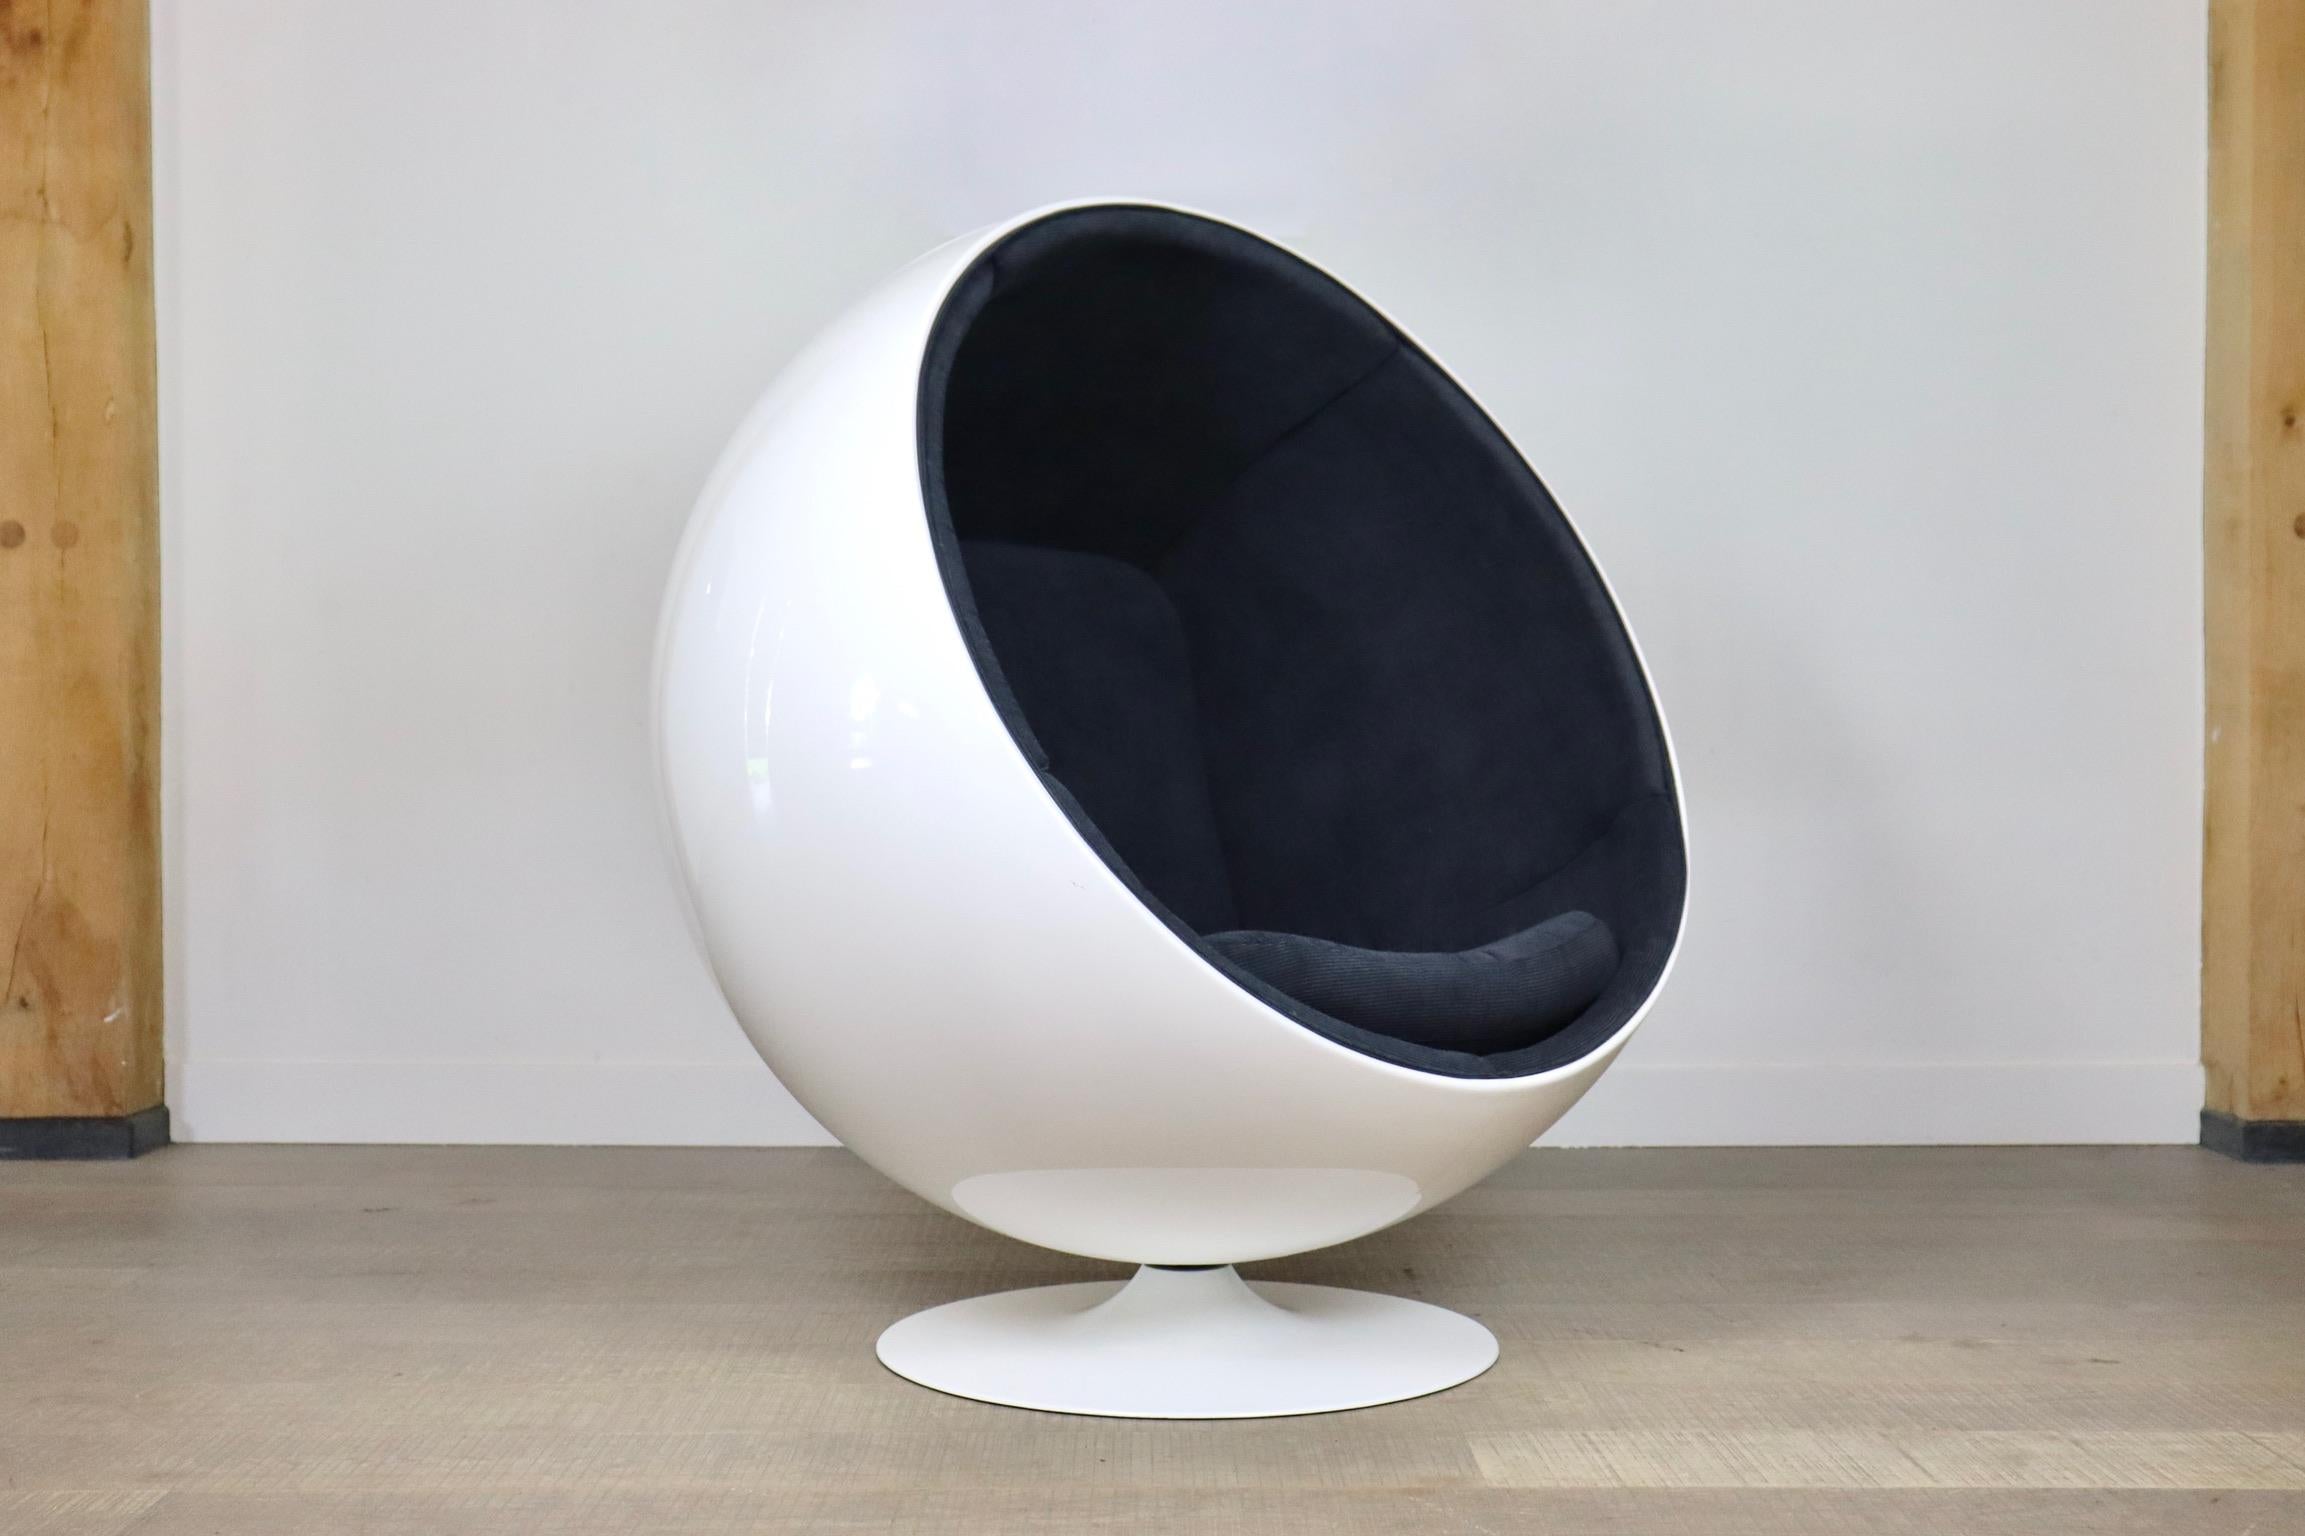 This design is from outer space! The ball chair was designed in 1963 and debuted at the Cologne Furniture Fair in 1966. The chair is one of the most famous and beloved classics of Finnish design and it was the international breakthrough of Eero